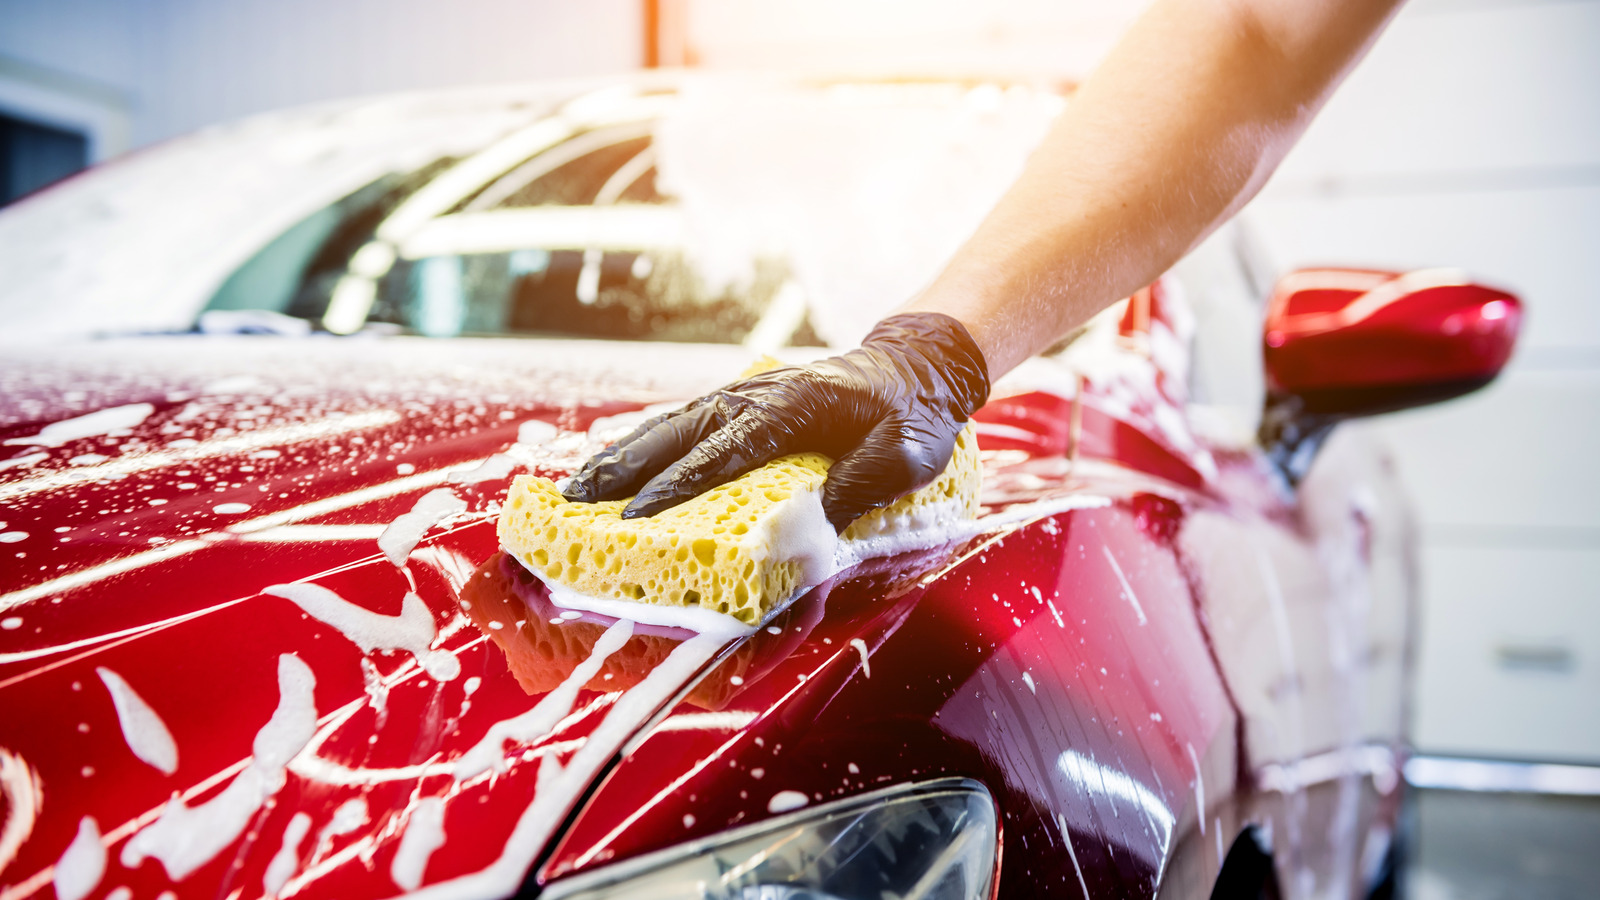 5 Car Care Items All Serious Auto-Owners Must Have in Their Garage